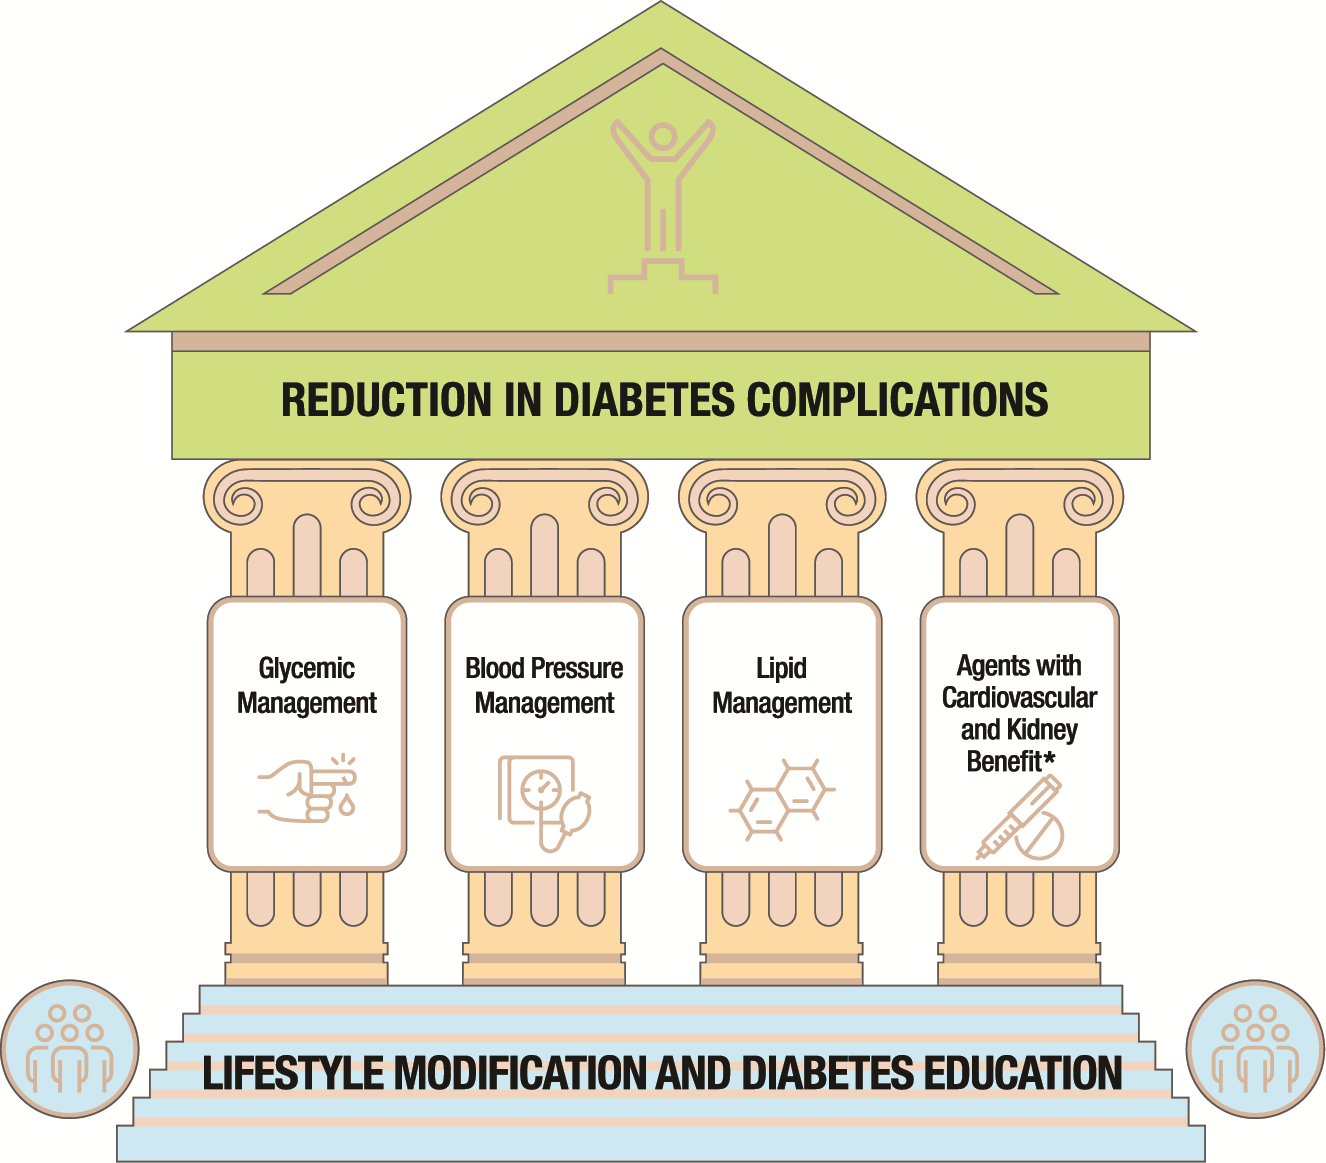 Image depicting 4 pillars of lifestyle modification and diabetes education — glycemic management, blood pressure management, lipid management, and agents with cardiovascular and kidney benefits — to reduce diabetes complications.